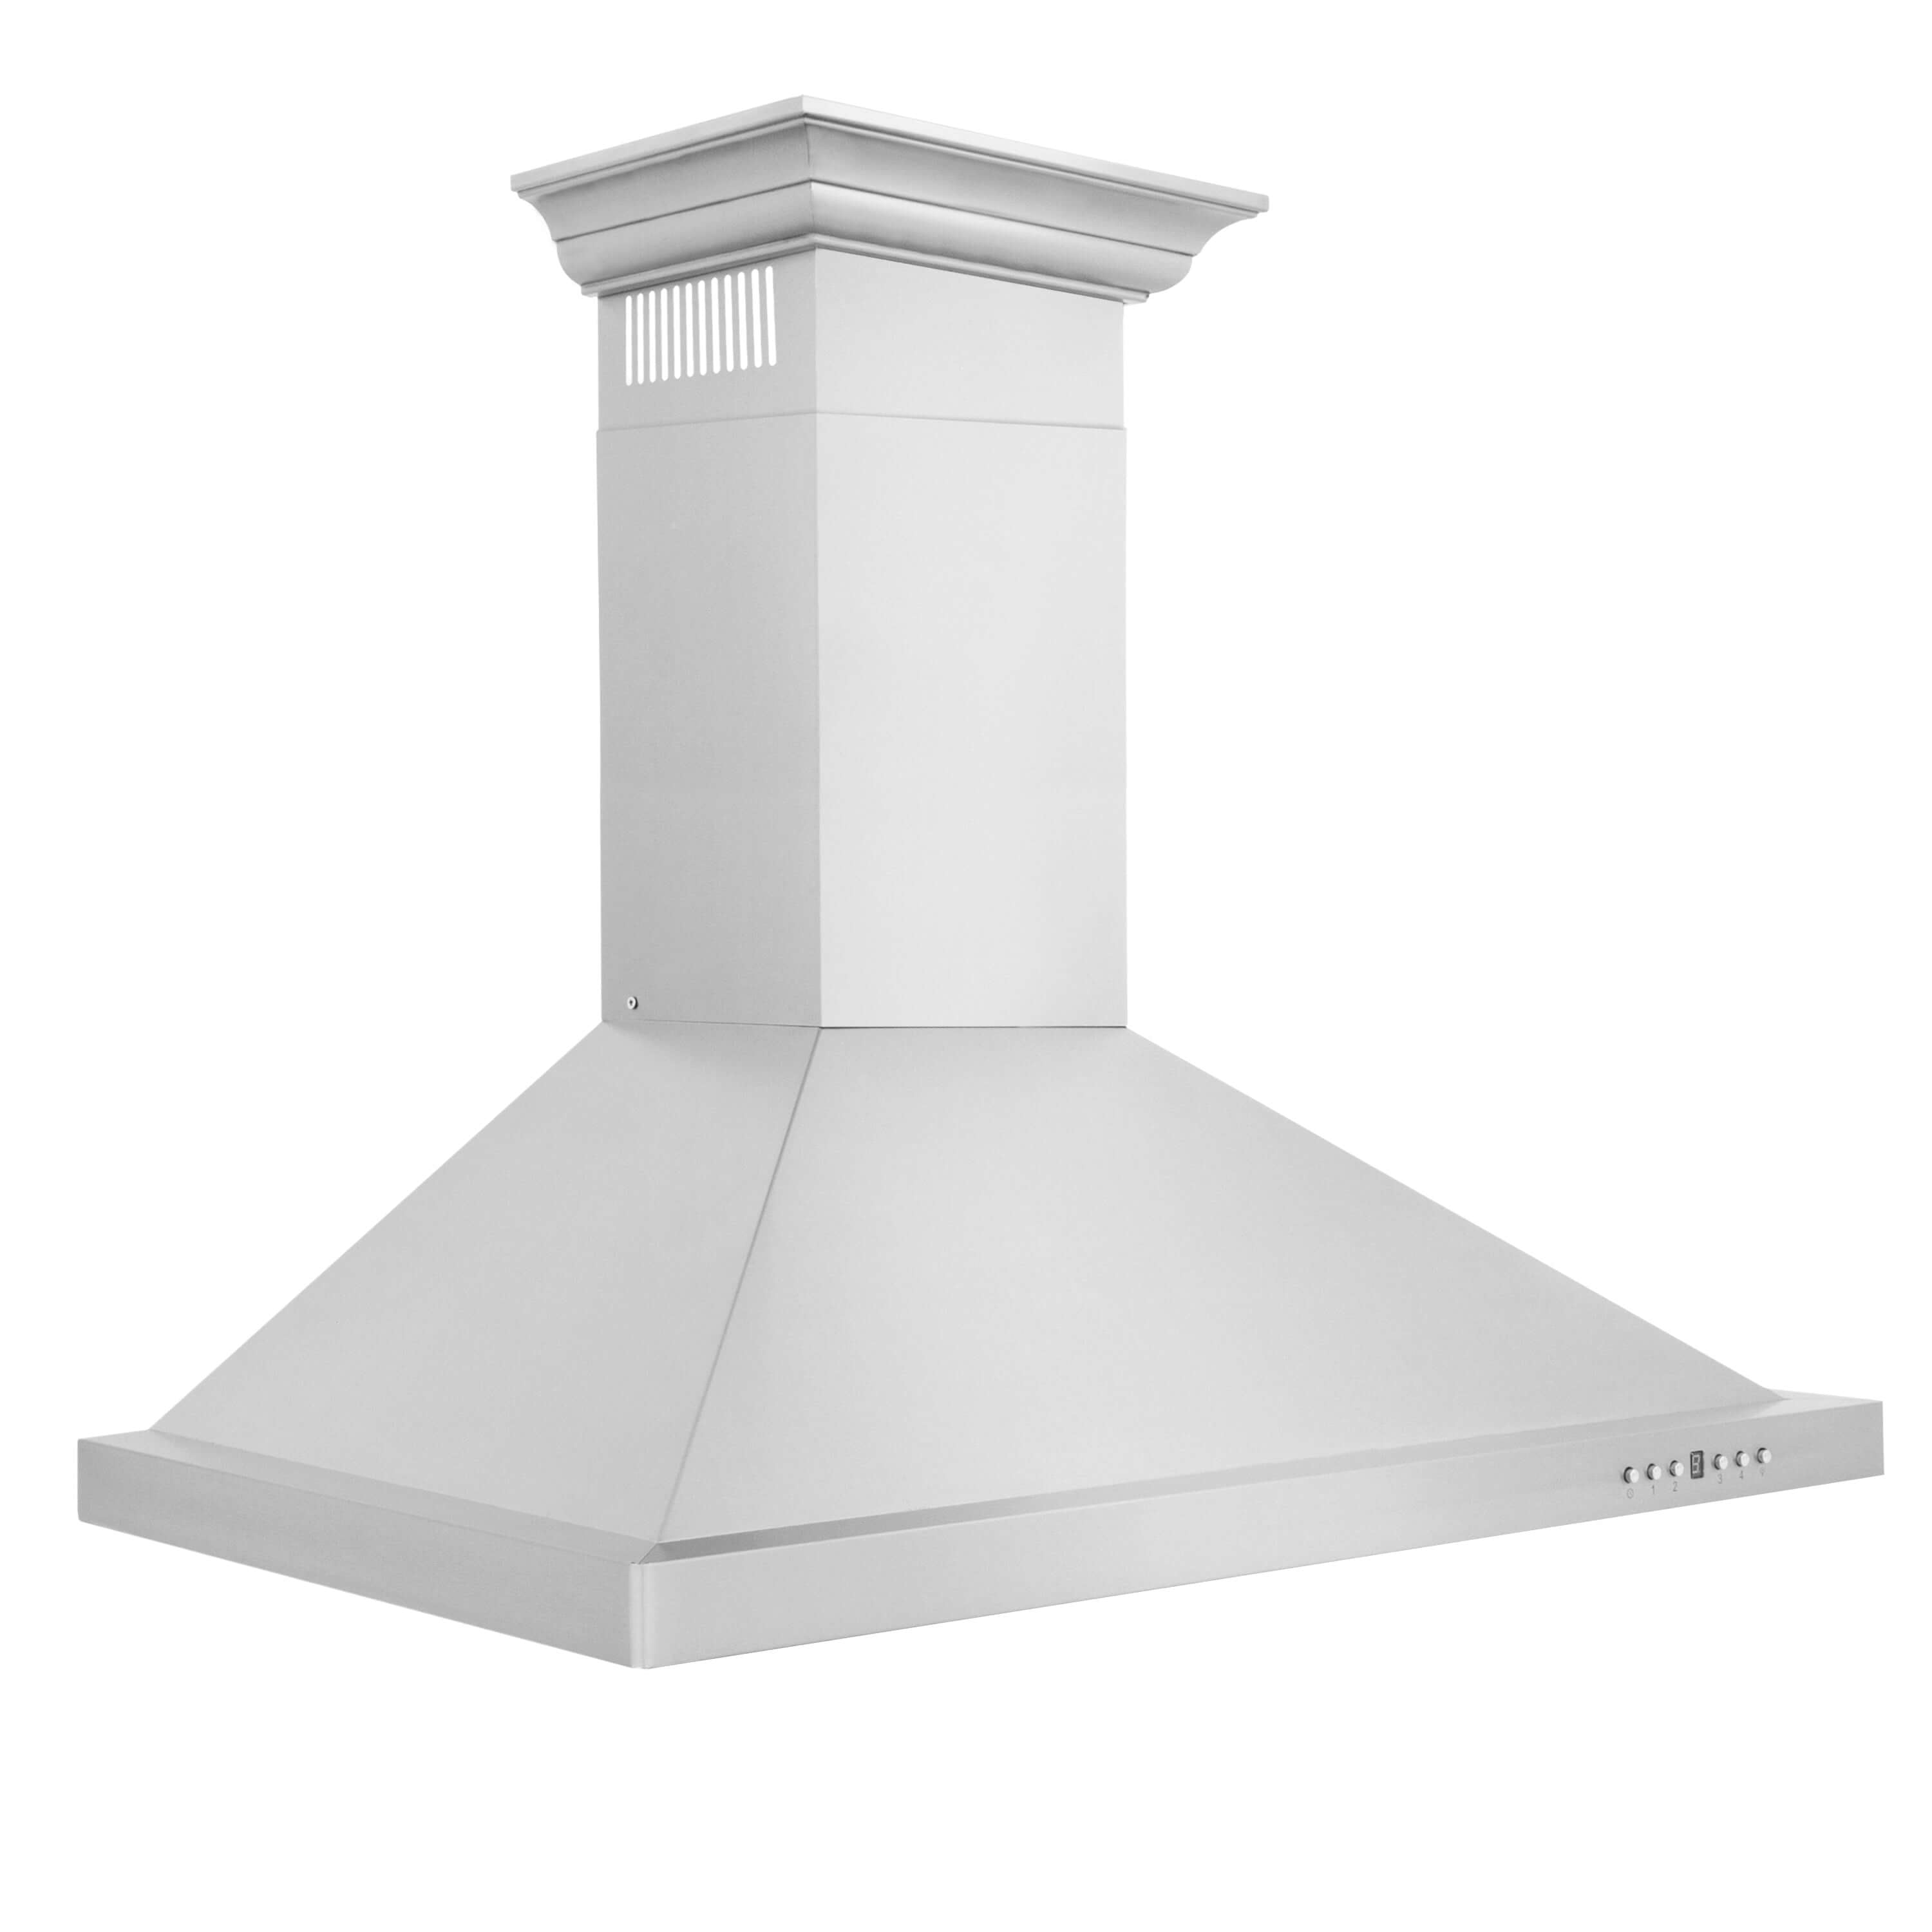 ZLINE 36" Convertible Vent Wall Mount Range Hood in Stainless Steel with Crown Molding (KBCRN-36)